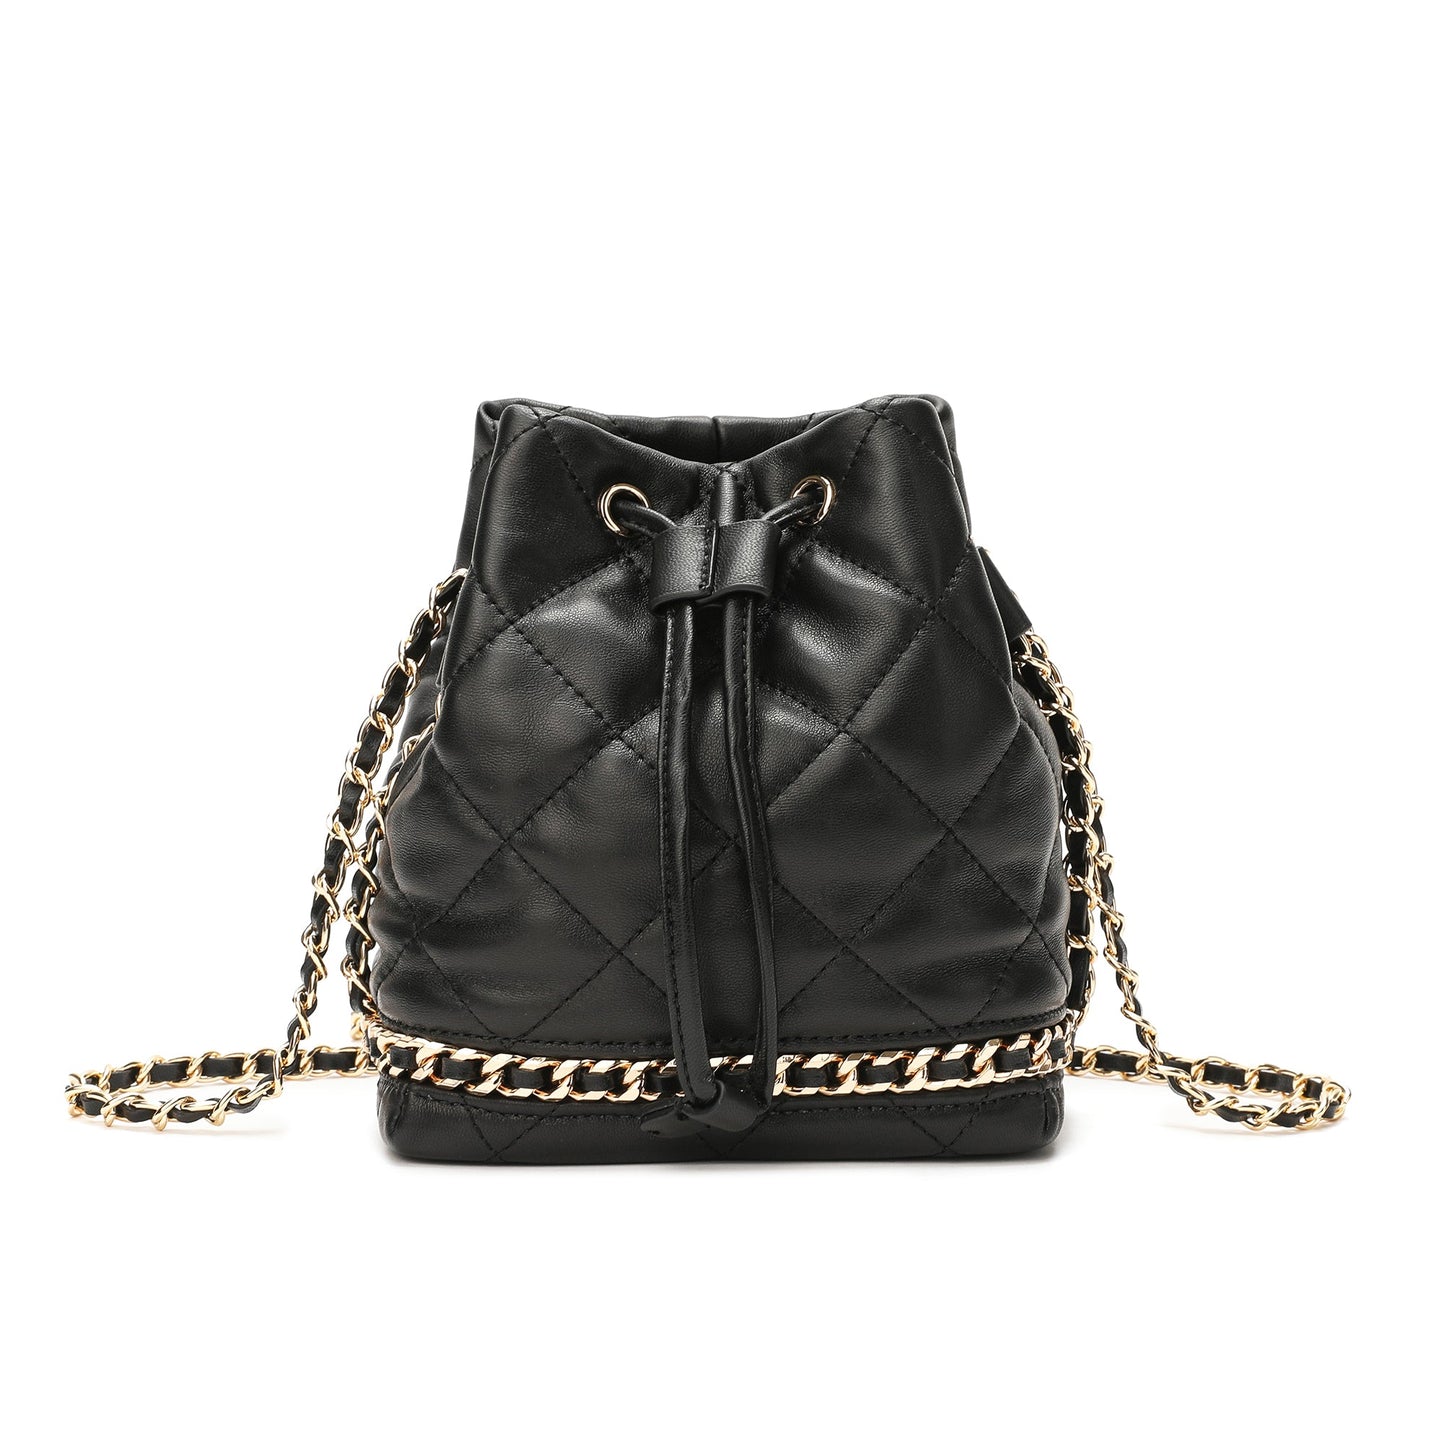 Full-Grain Quilted Lambskin Leather Drawstring Bag